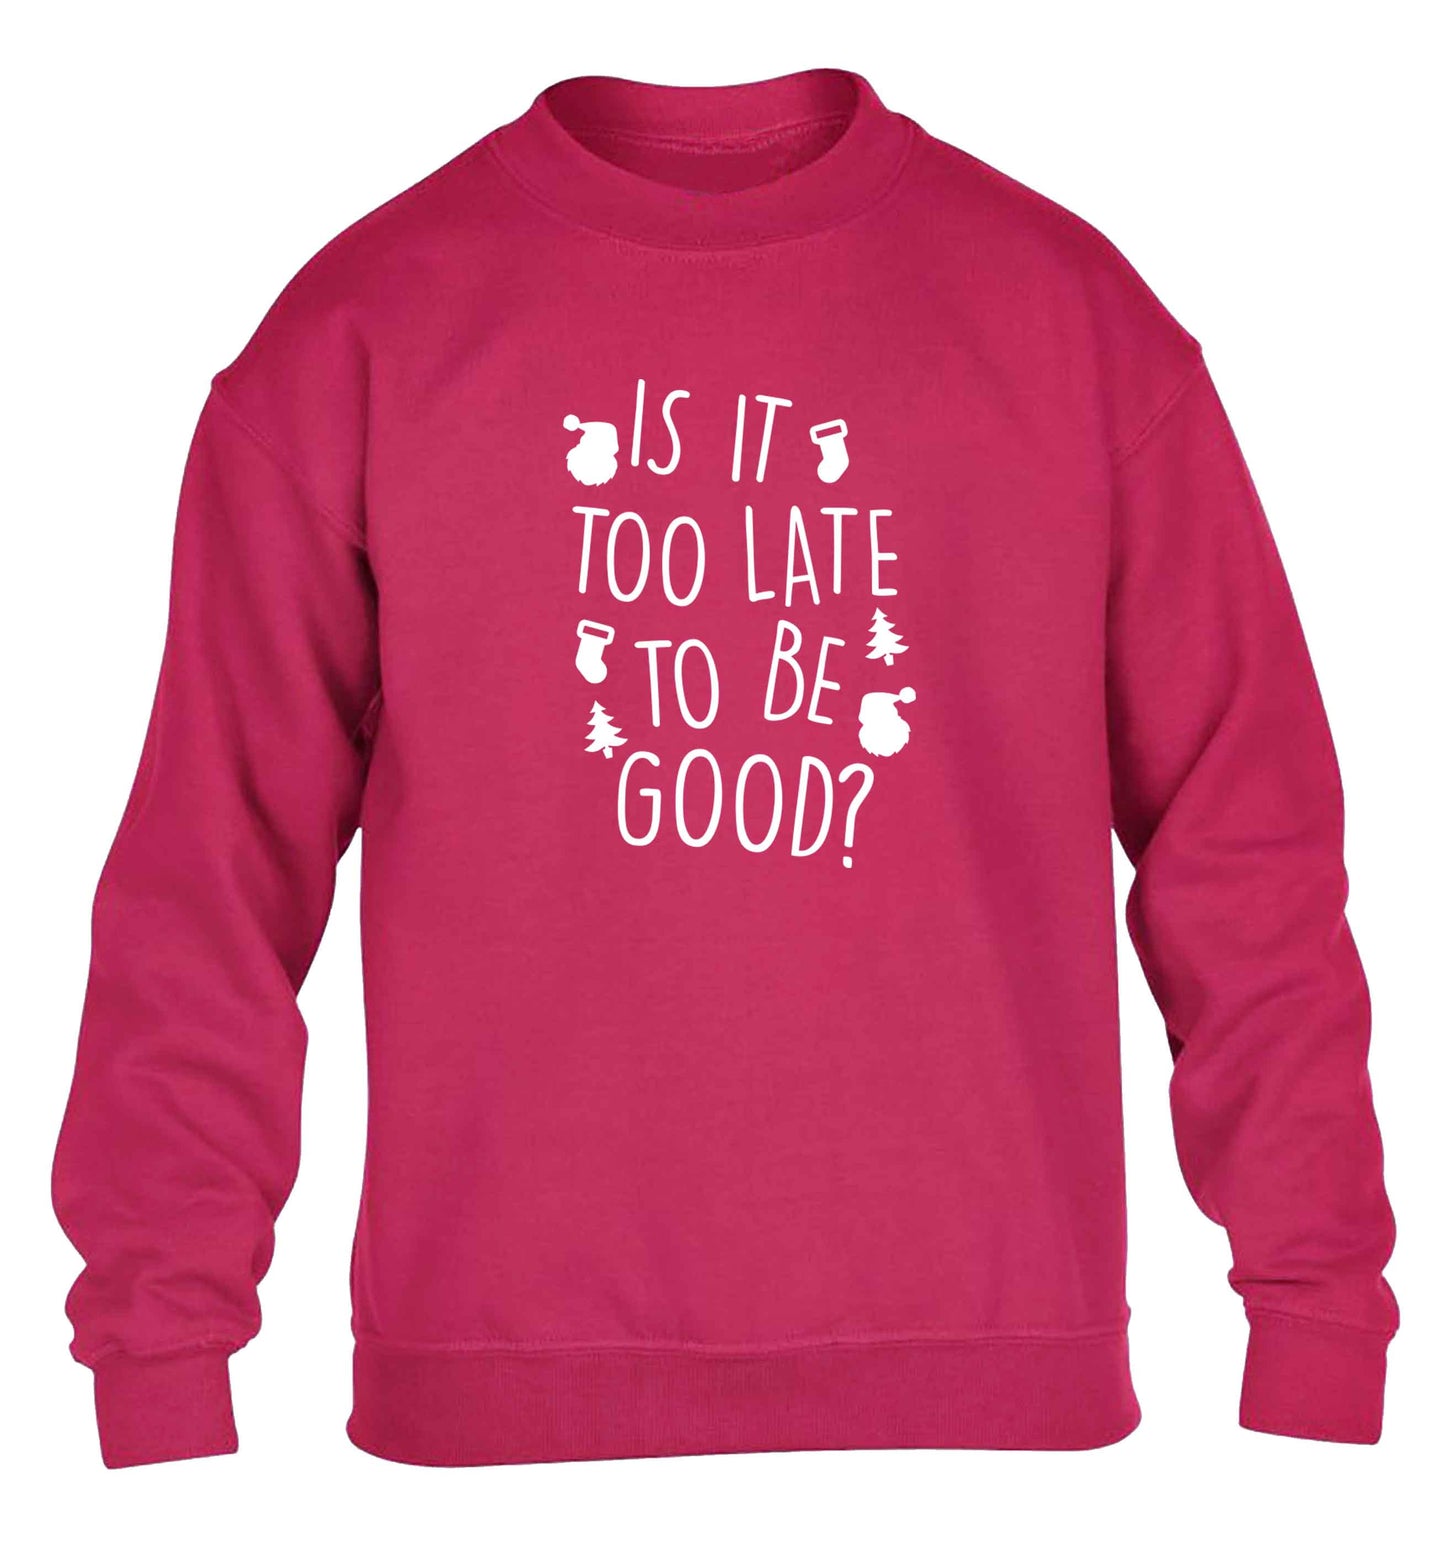 Too Late to be Good children's pink sweater 12-13 Years